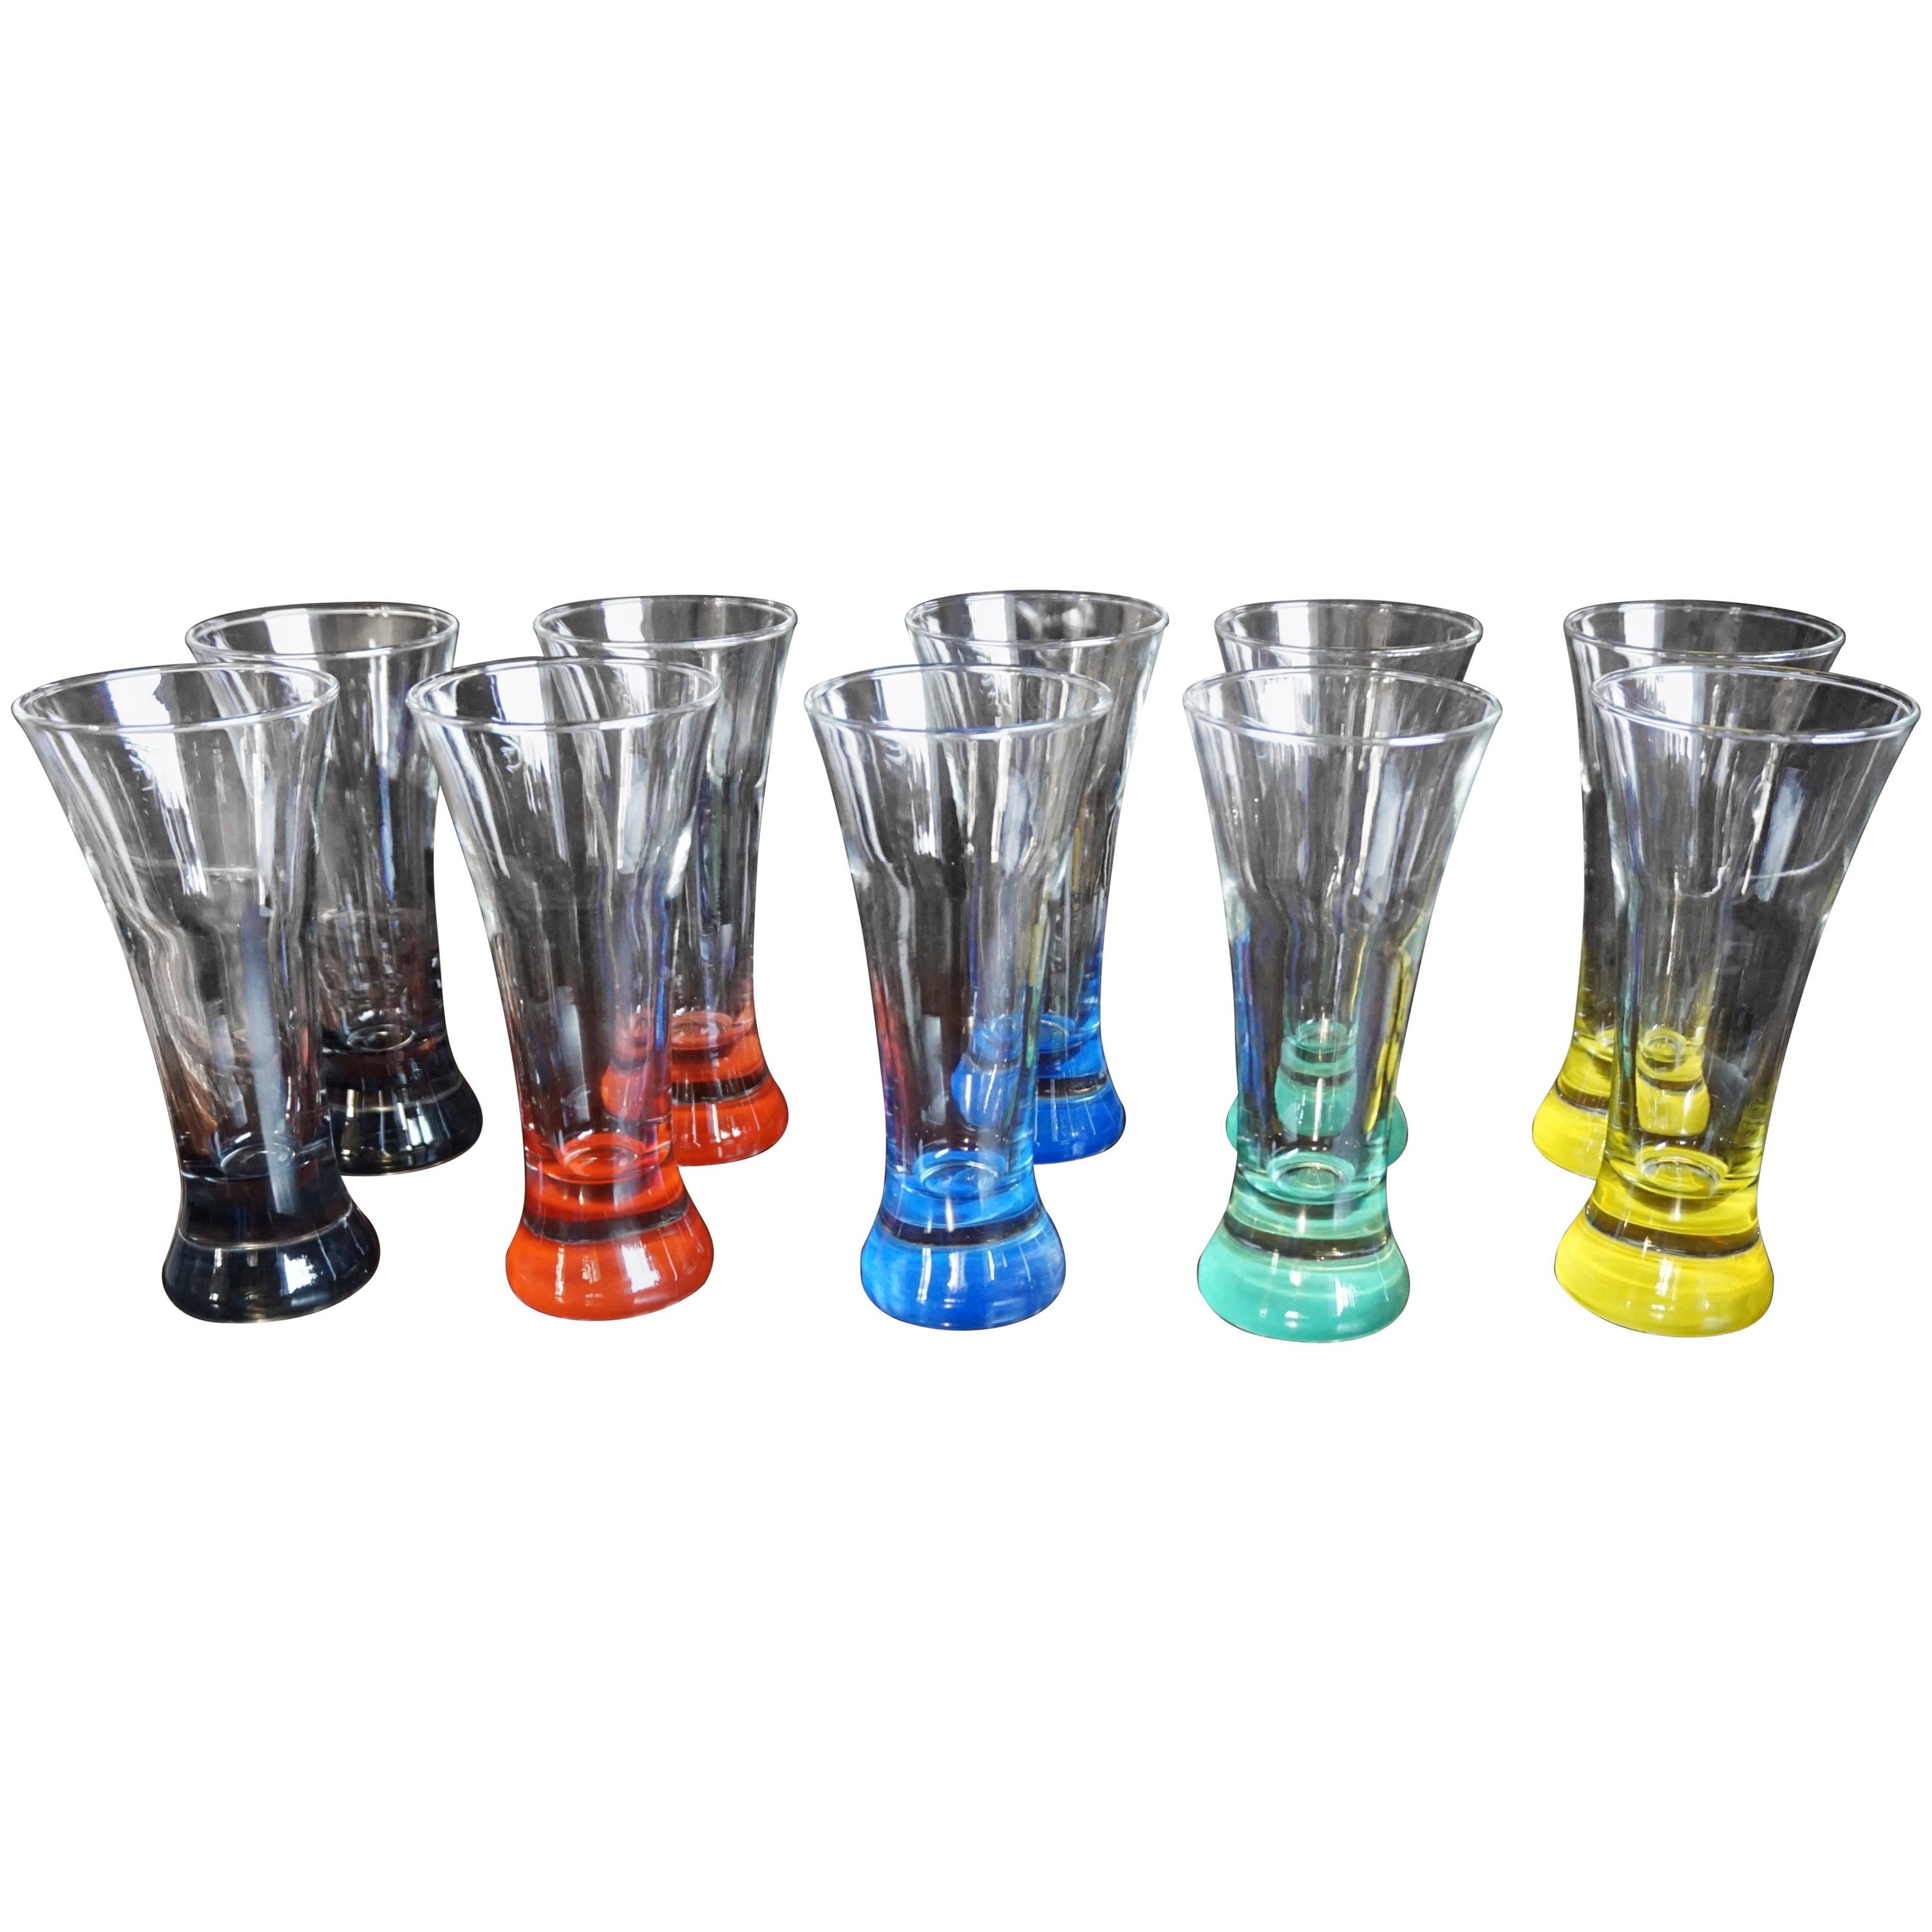 Rare colorful and Stylish Set of Midcentury Modern French Drinking Glasses  For Sale